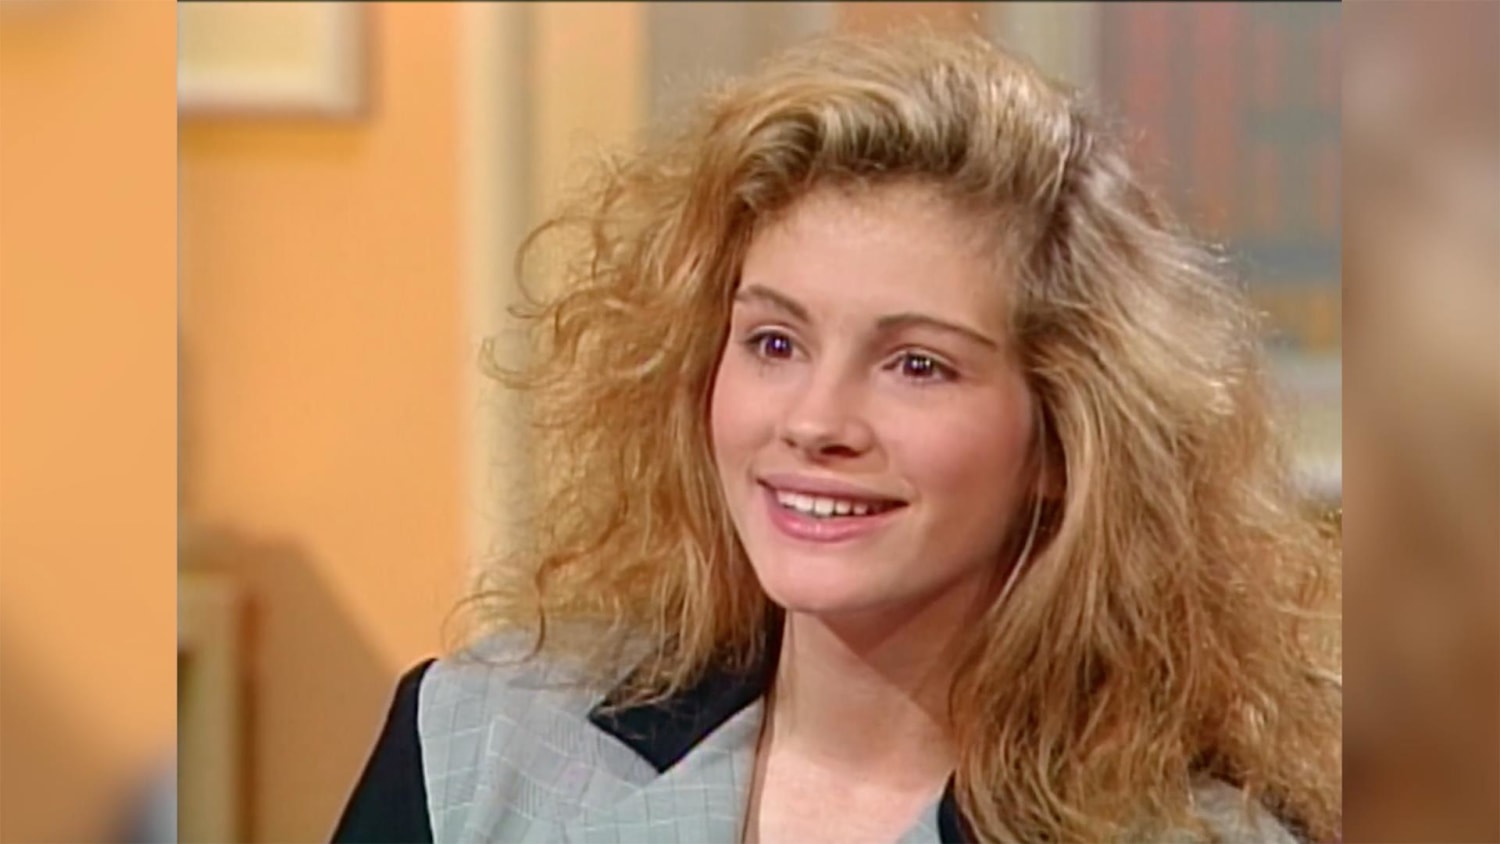 Why Julia Roberts Lost Her Role in 'Pretty Woman' — and Then Got It Back